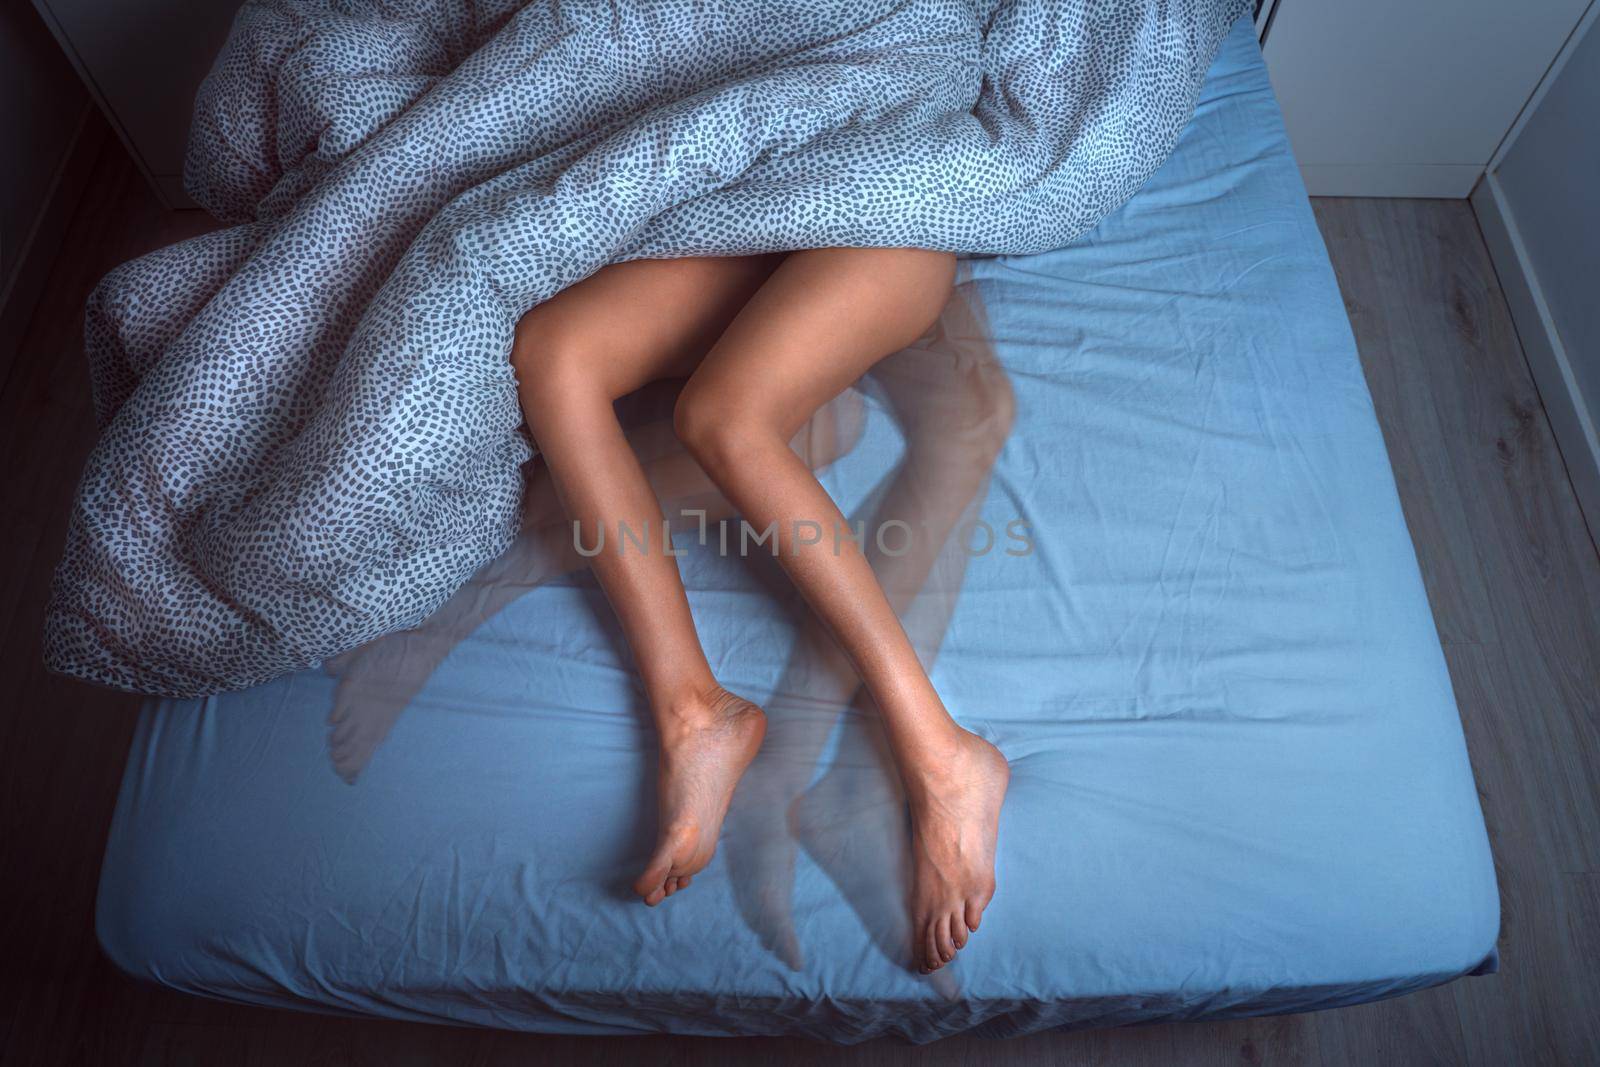 Woman sleeping in the bed and suffering from RLS or restless legs syndrome by DariaKulkova